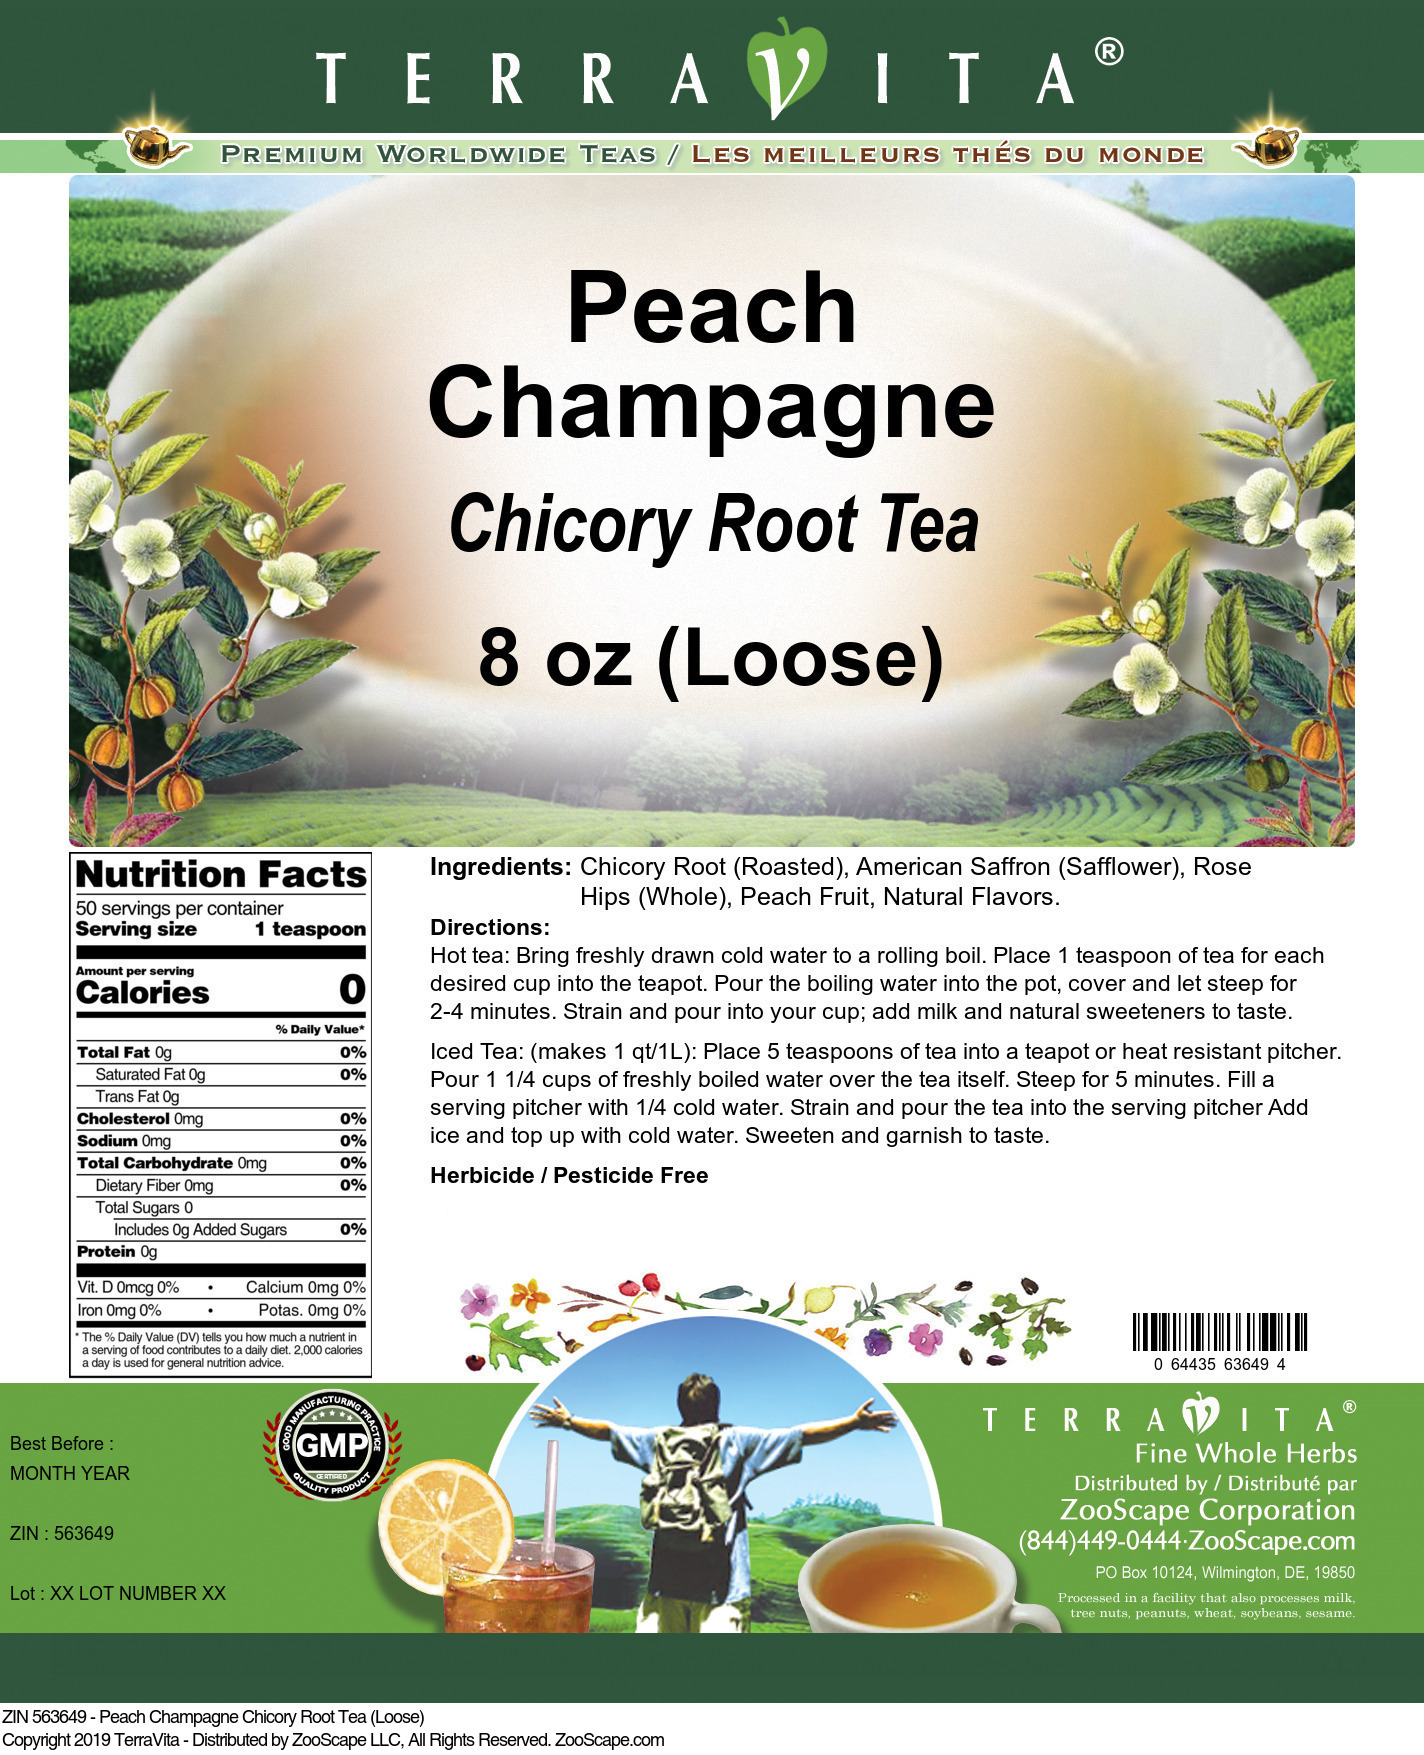 Peach Champagne Chicory Root Tea (Loose) - Label